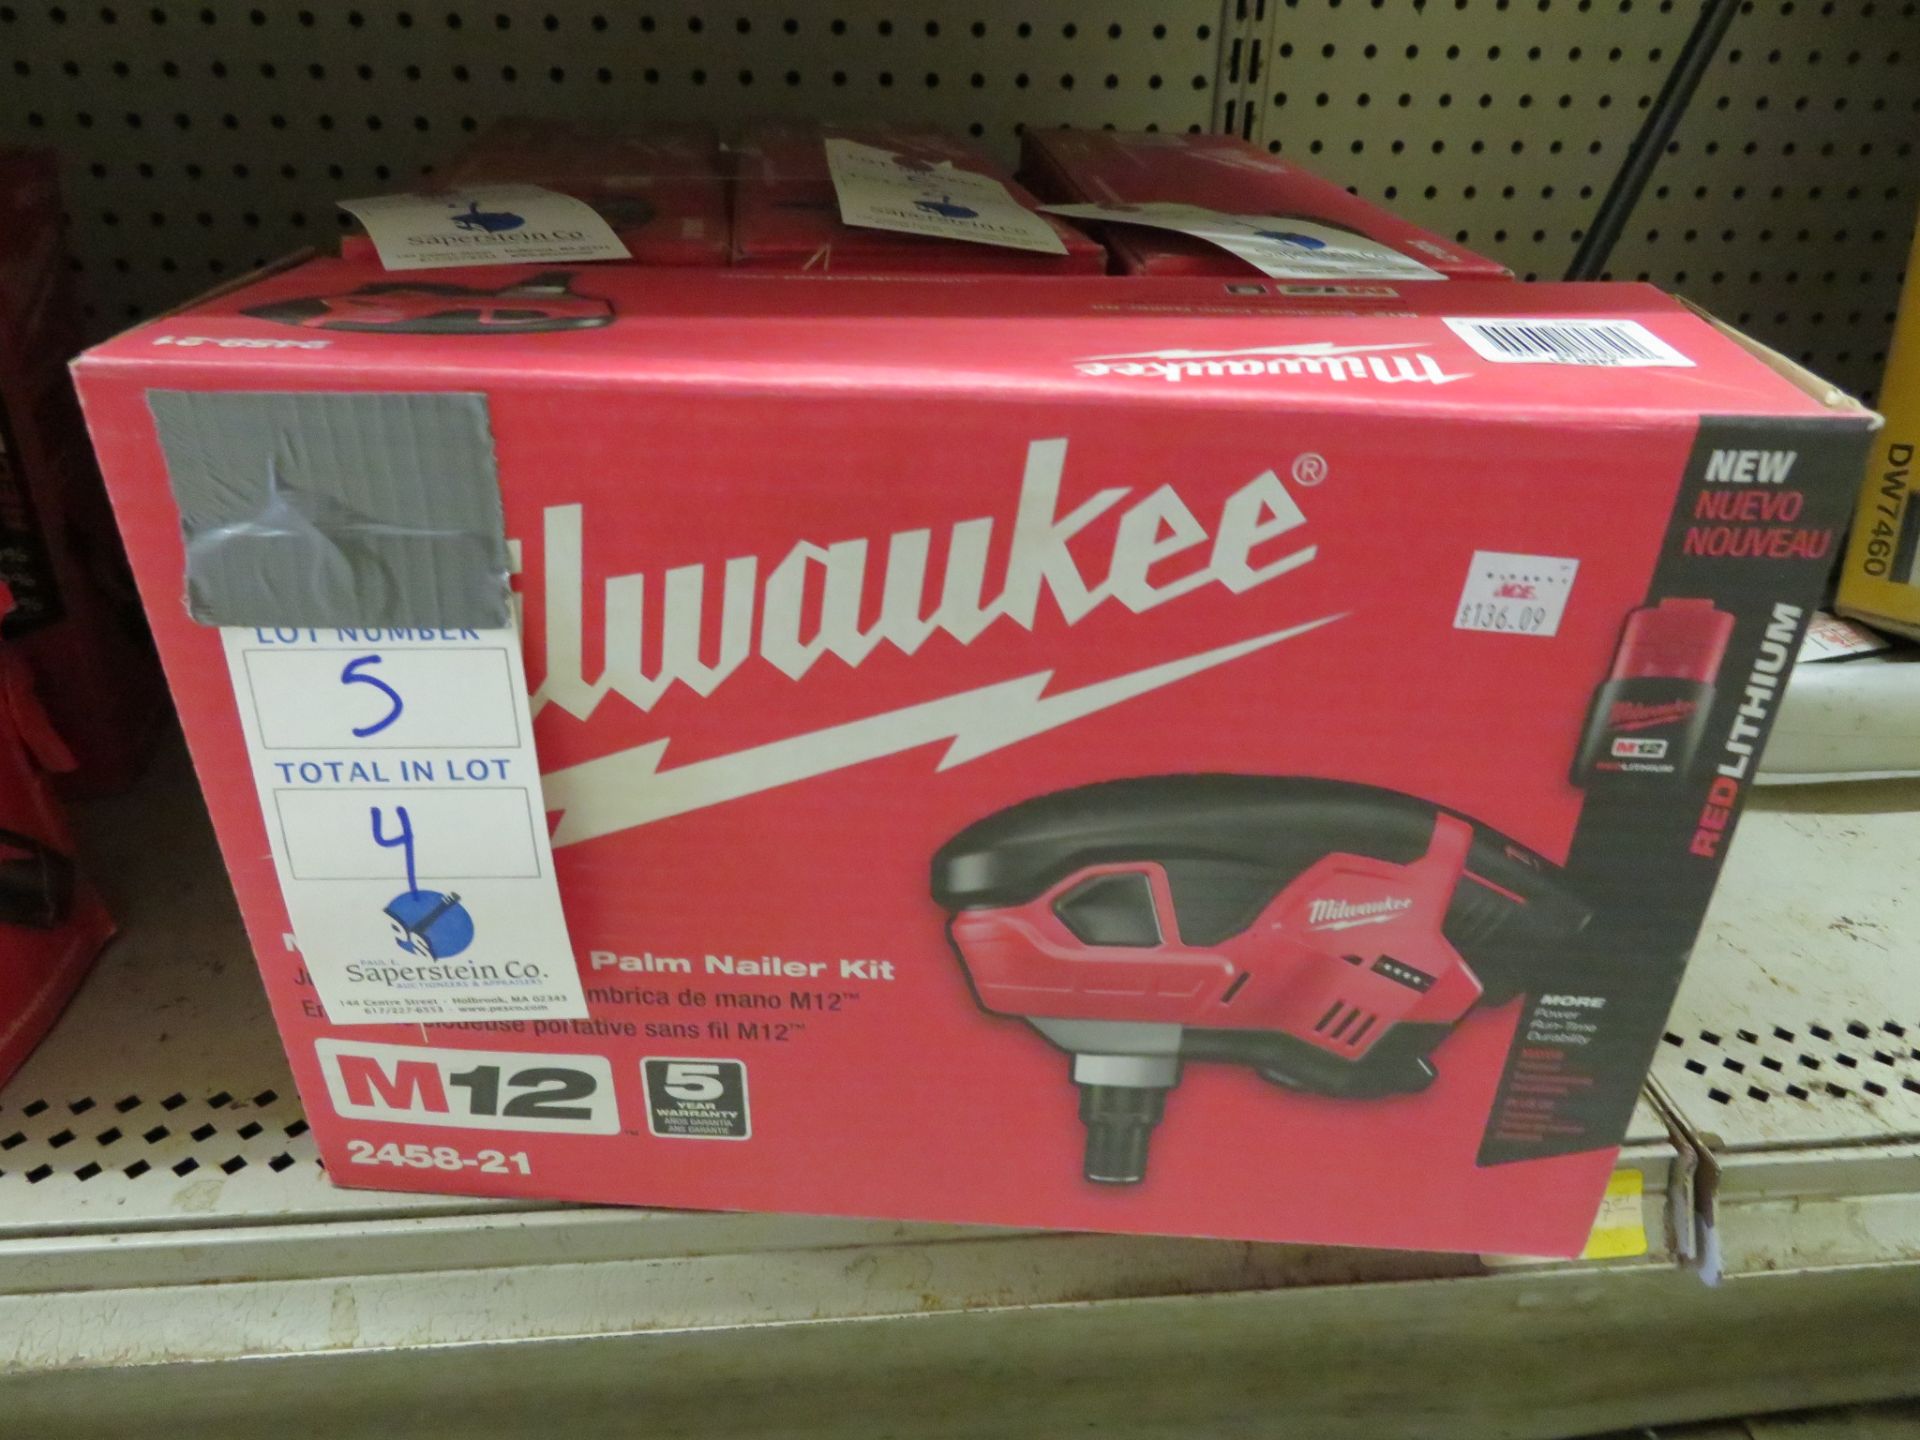 (4) Milwaukee M12 #2458-21 Cordless Palm Nailers w/Soft Case, Charger & Battery (NIB) (Retail Price: